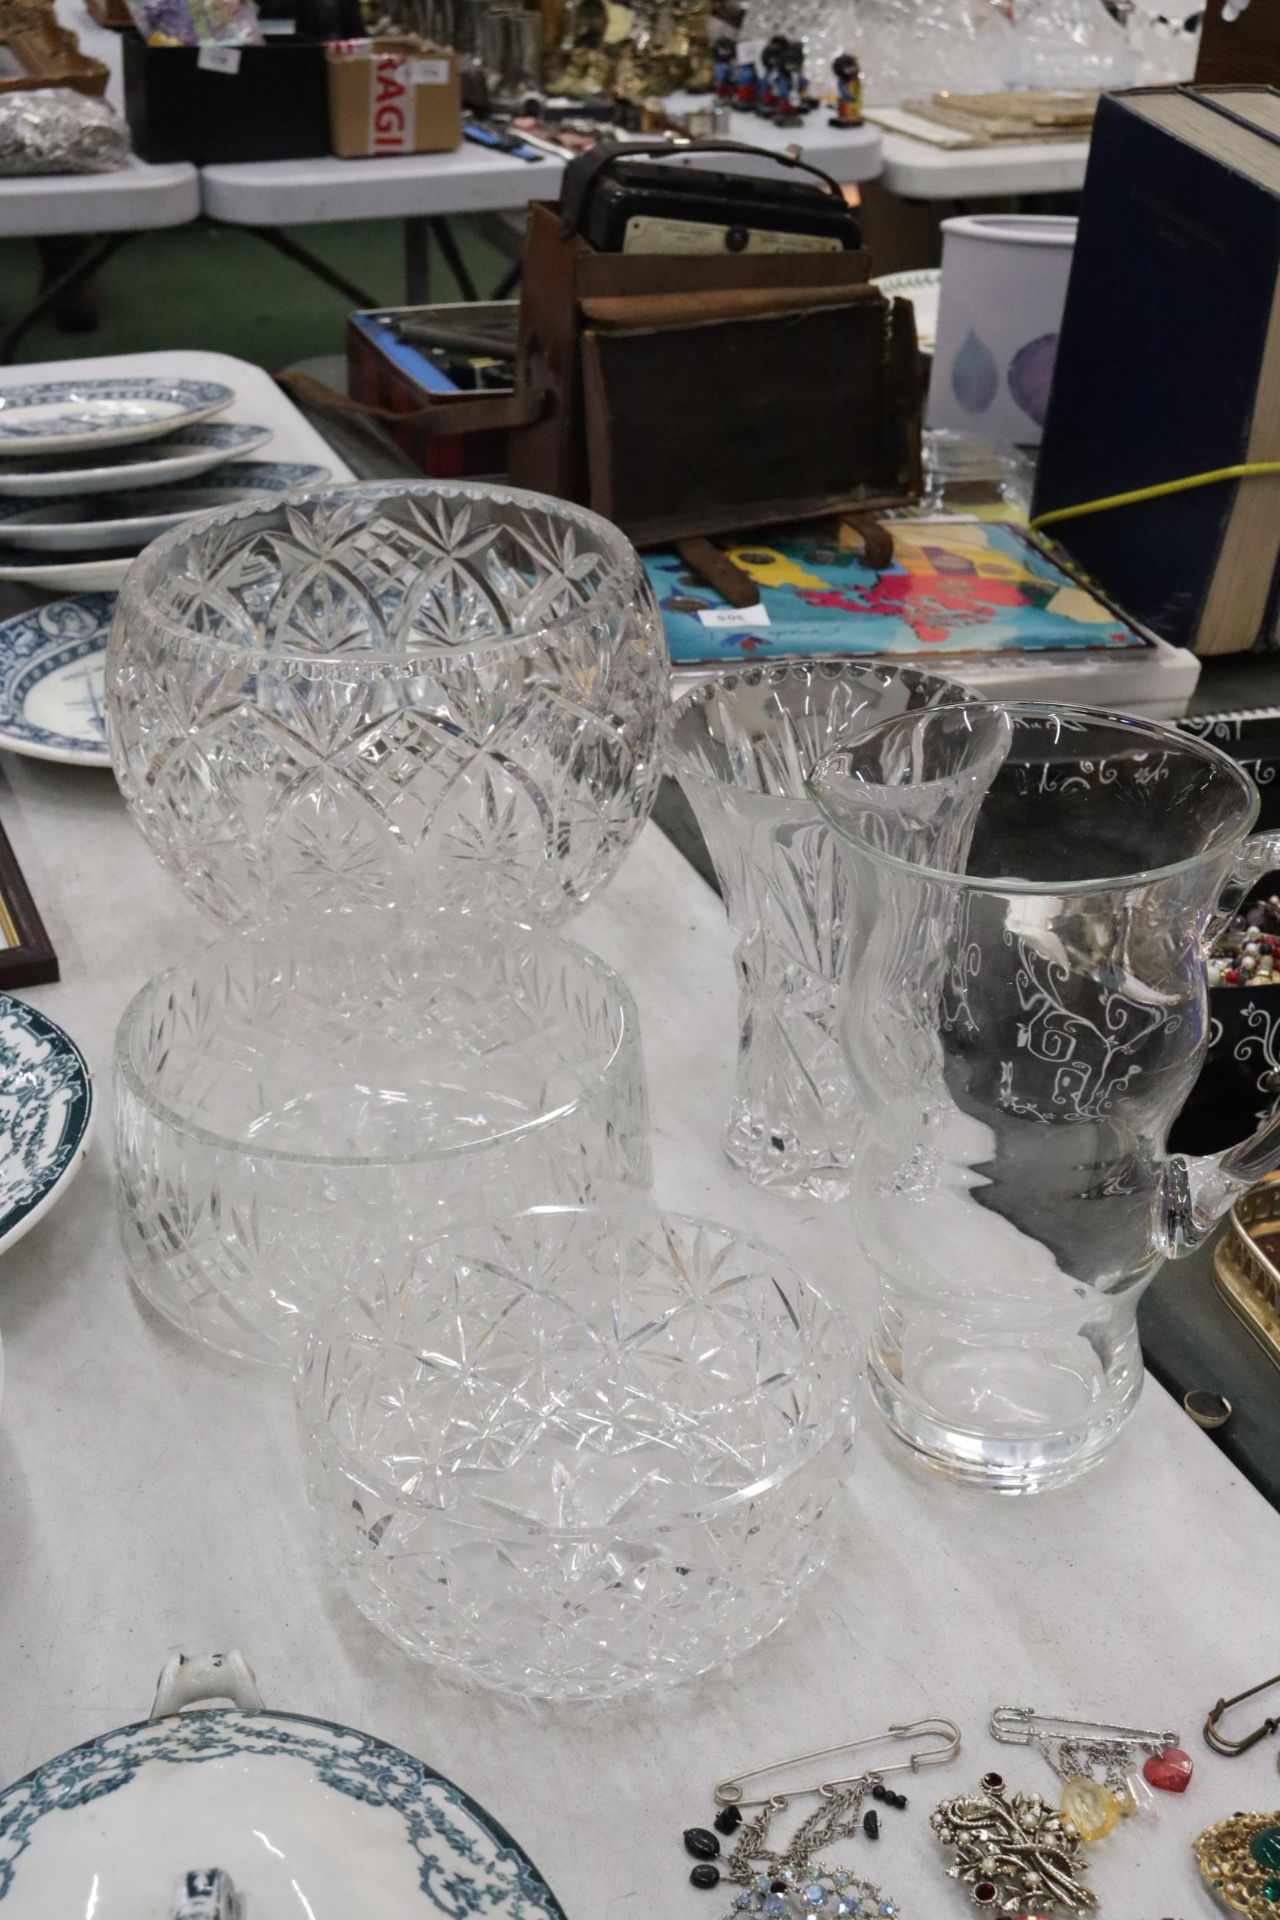 FIVE PIECES OF HEAVY GLASSWARE TO INCLUDE A LARGE CUT GLASS BOWL, TWO OTHER BOWLS, A VASE AND A JUG